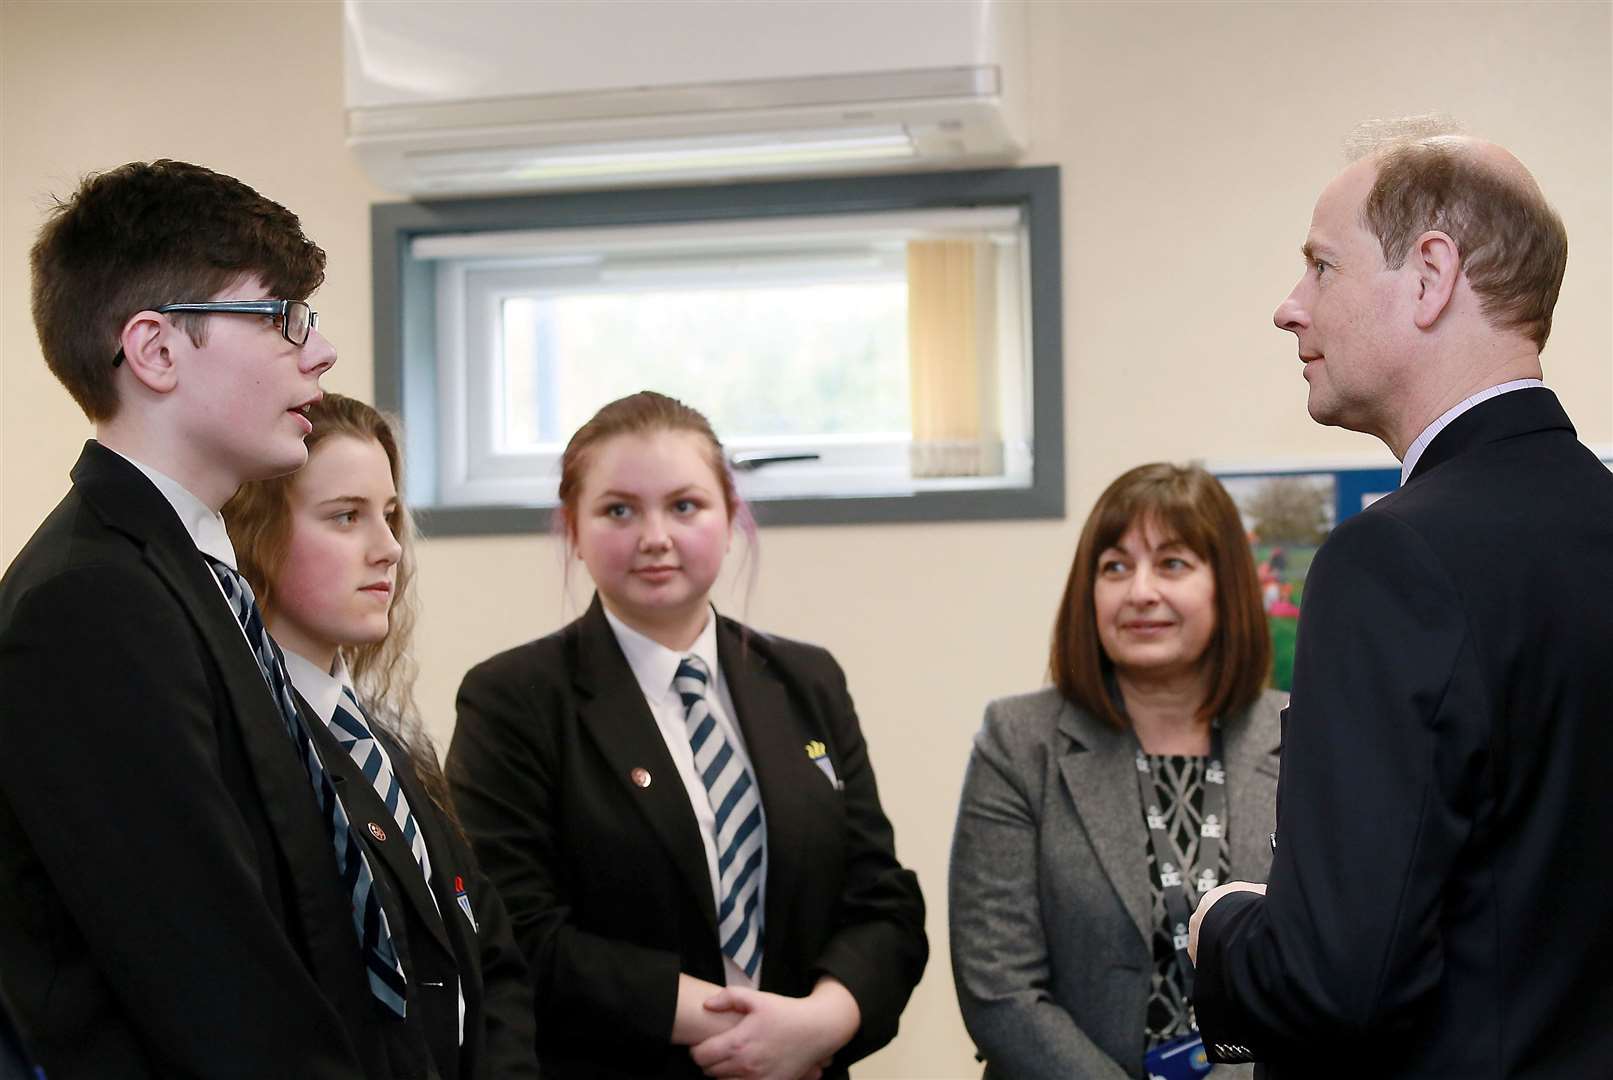 The Earl of Wessex spoke to schools participating in the scheme. Picture: Phil Lee